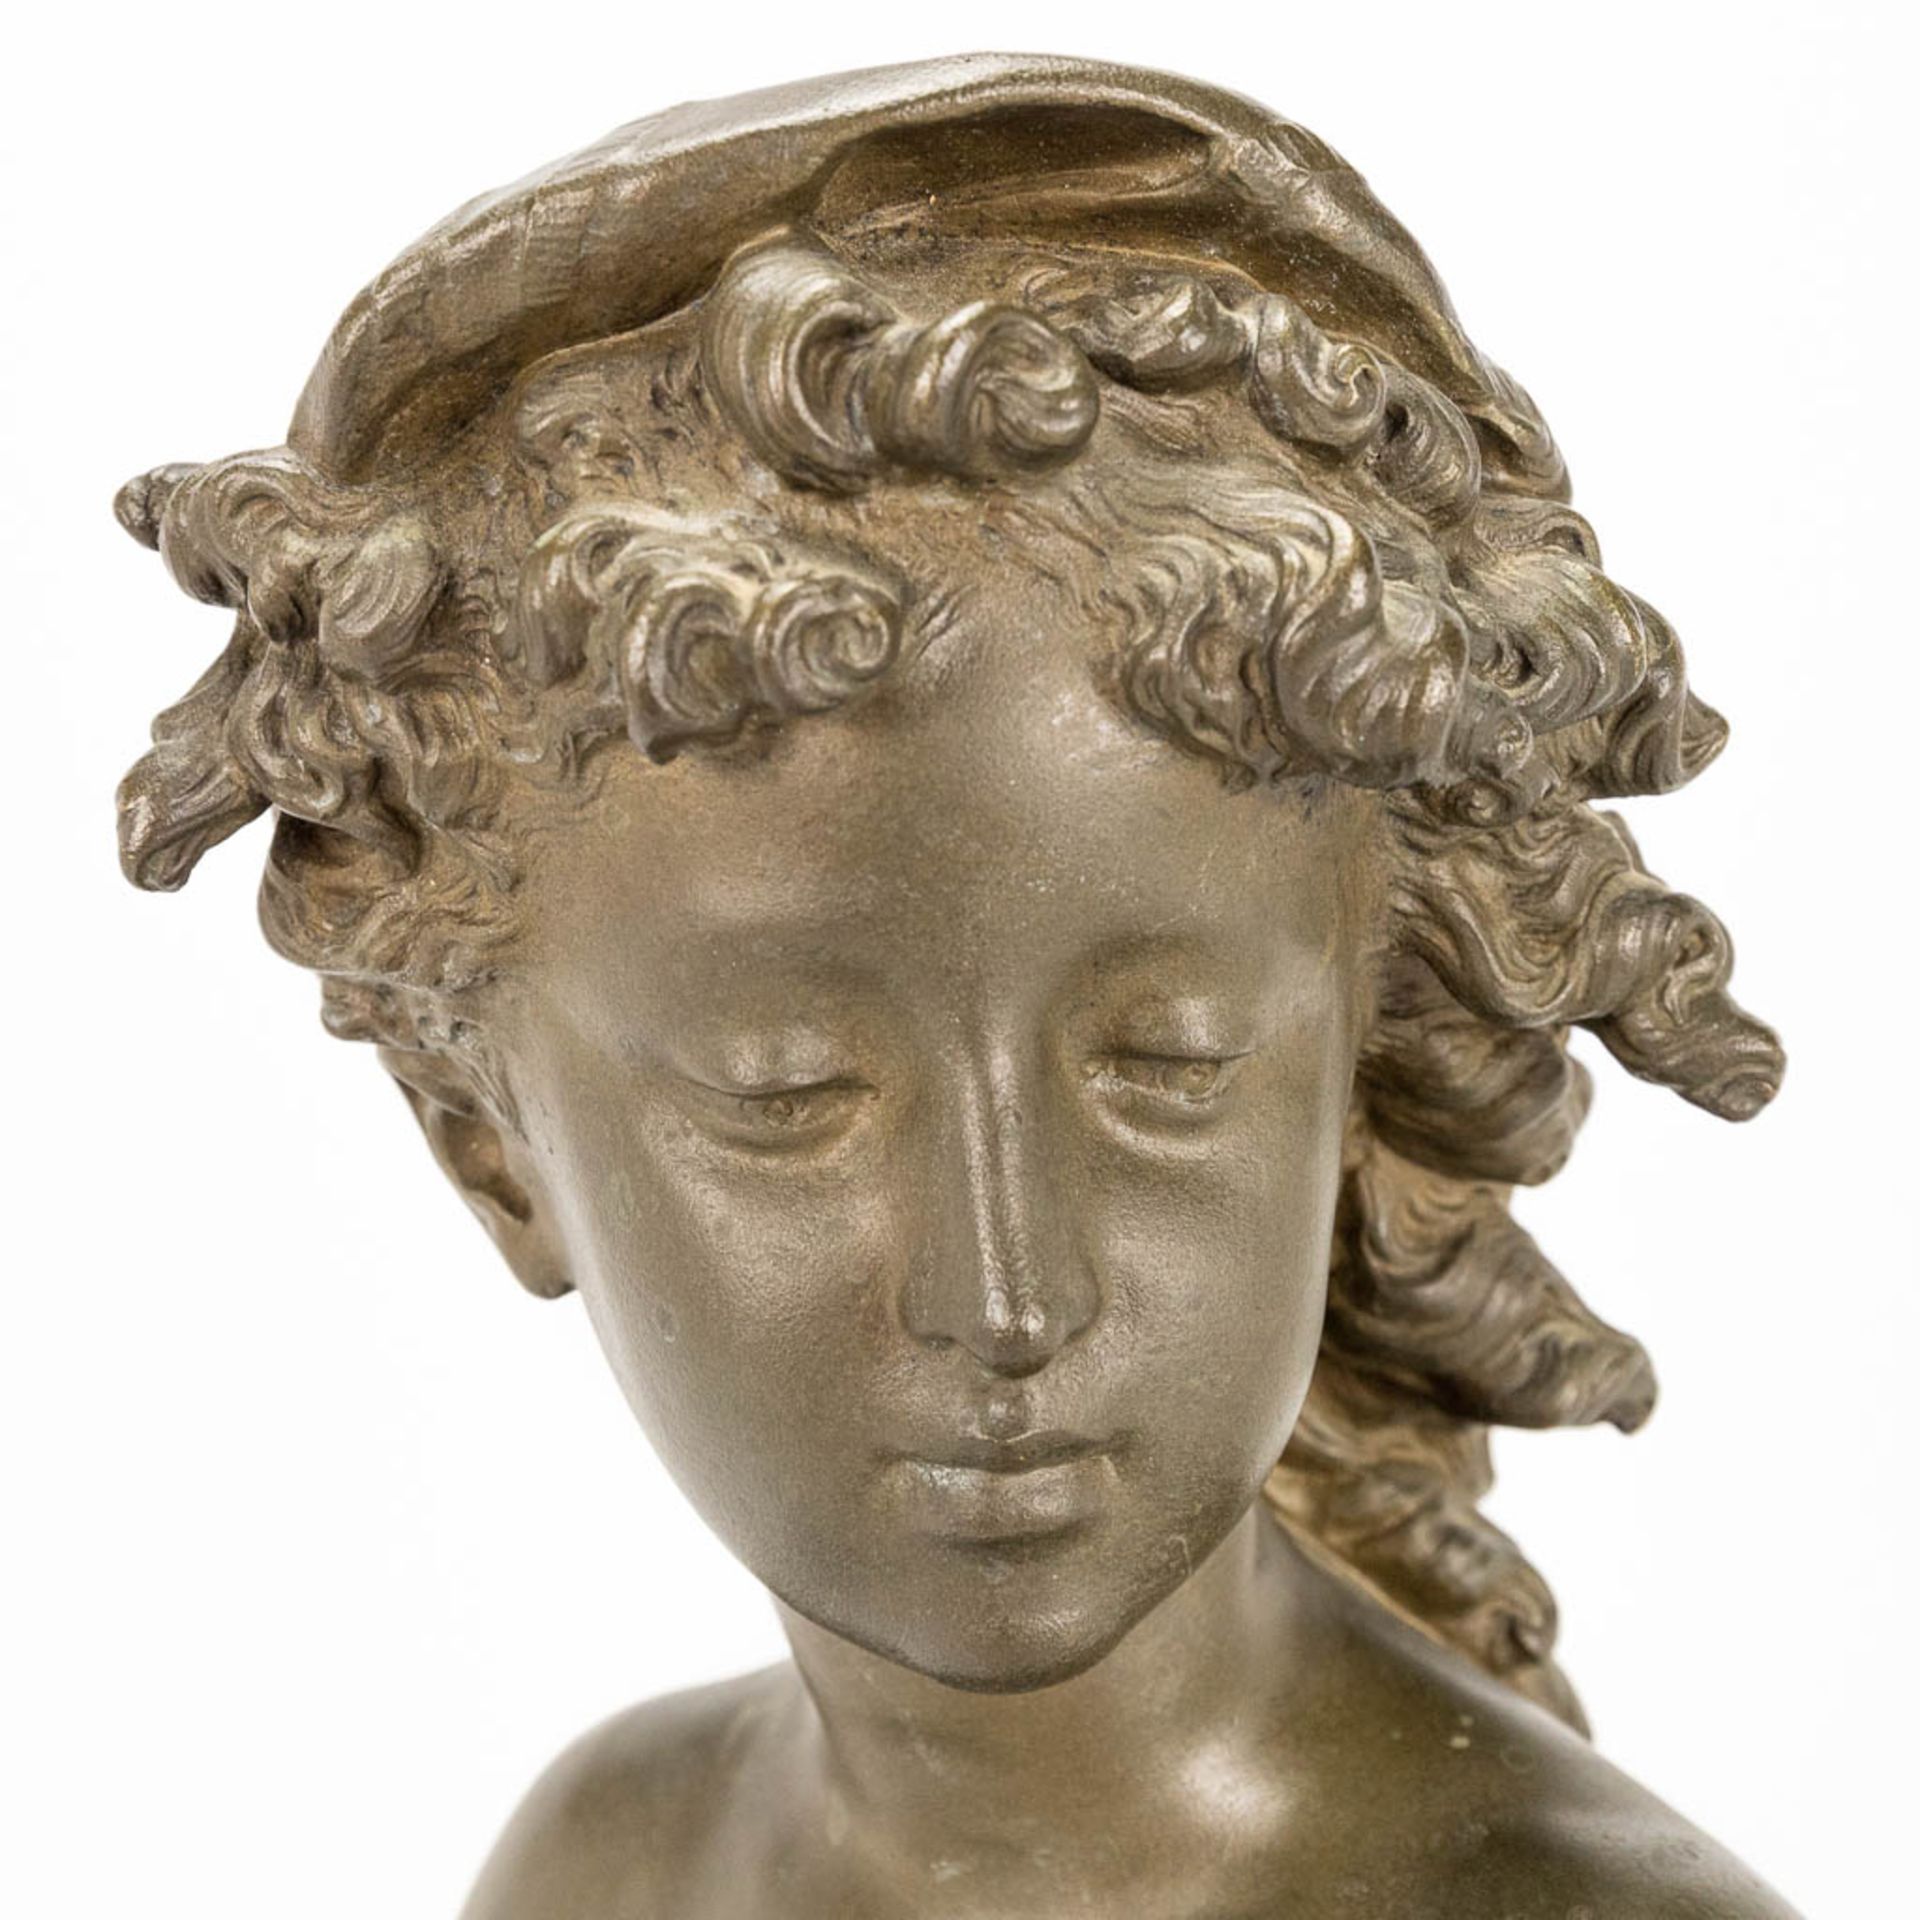 A bust of a young lady, made of bronze and marked Compagnie des bronzes, Bruxelles. - Image 7 of 11